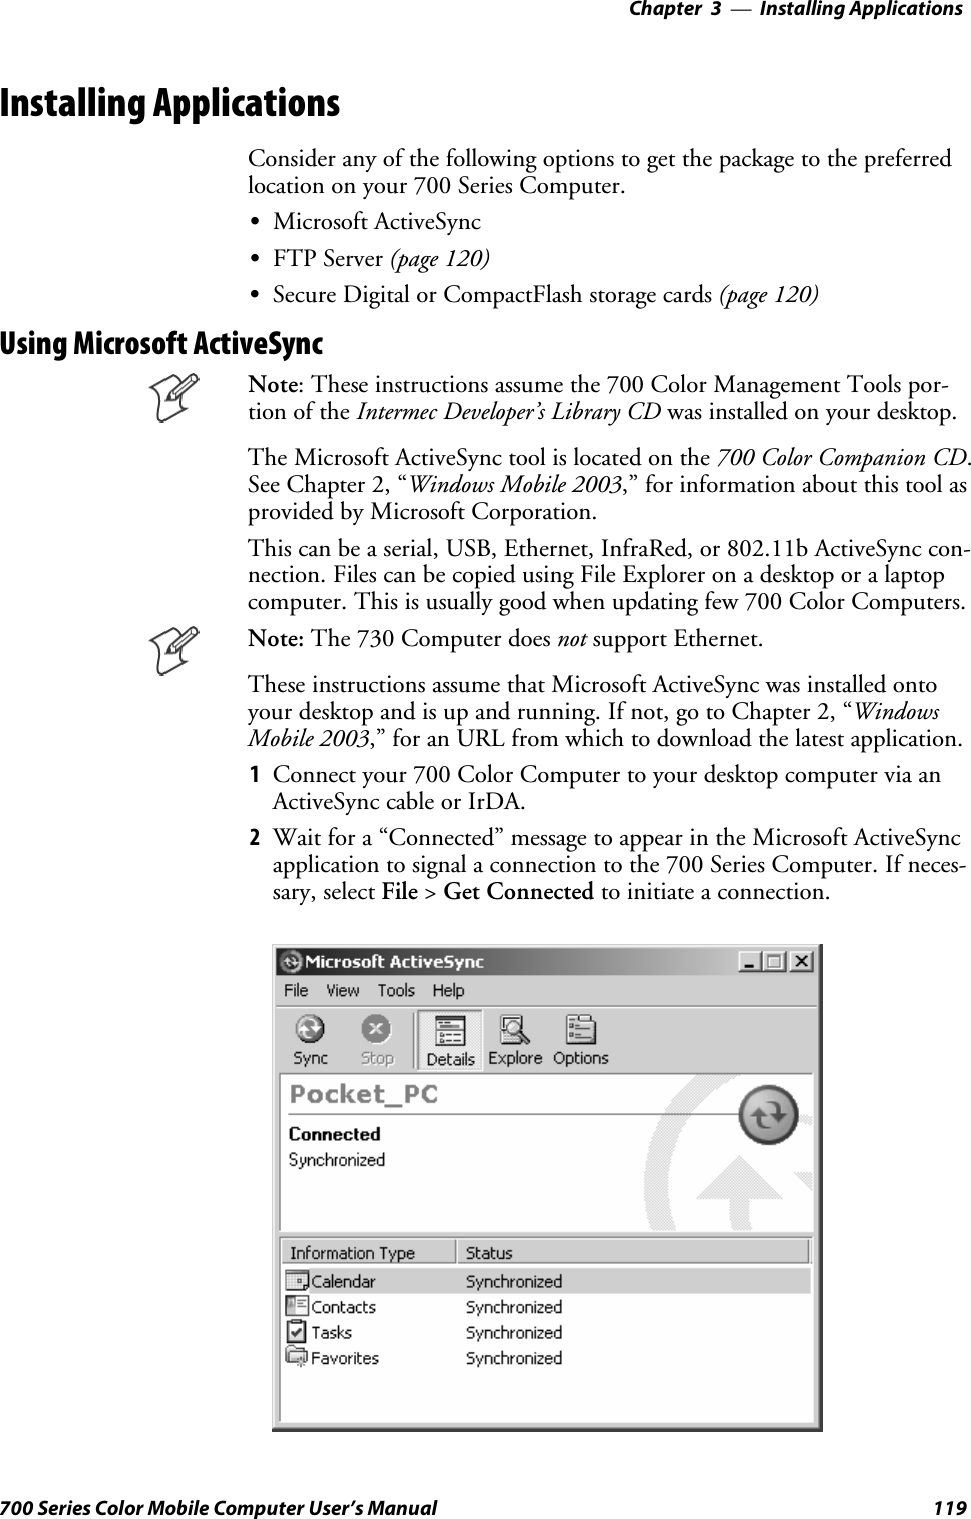 Installing Applications—Chapter 3119700 Series Color Mobile Computer User’s ManualInstalling ApplicationsConsider any of the following options to get the package to the preferredlocation on your 700 Series Computer.SMicrosoft ActiveSyncSFTP Server (page 120)SSecure Digital or CompactFlash storage cards (page 120)Using Microsoft ActiveSyncNote: These instructions assume the 700 Color Management Tools por-tion of the Intermec Developer’s Library CD was installed on your desktop.The Microsoft ActiveSync tool is located on the 700 Color Companion CD.See Chapter 2, “Windows Mobile 2003,” for information about this tool asprovided by Microsoft Corporation.This can be a serial, USB, Ethernet, InfraRed, or 802.11b ActiveSync con-nection. Files can be copied using File Explorer on a desktop or a laptopcomputer. This is usually good when updating few 700 Color Computers.Note: The 730 Computer does not support Ethernet.These instructions assume that Microsoft ActiveSync was installed ontoyour desktop and is up and running. If not, go to Chapter 2, “WindowsMobile 2003,” for an URL from which to download the latest application.1Connectyour700ColorComputertoyourdesktopcomputerviaanActiveSync cable or IrDA.2Wait for a “Connected” message to appear in the Microsoft ActiveSyncapplication to signal a connection to the 700 Series Computer. If neces-sary, select File &gt;Get Connected to initiate a connection.